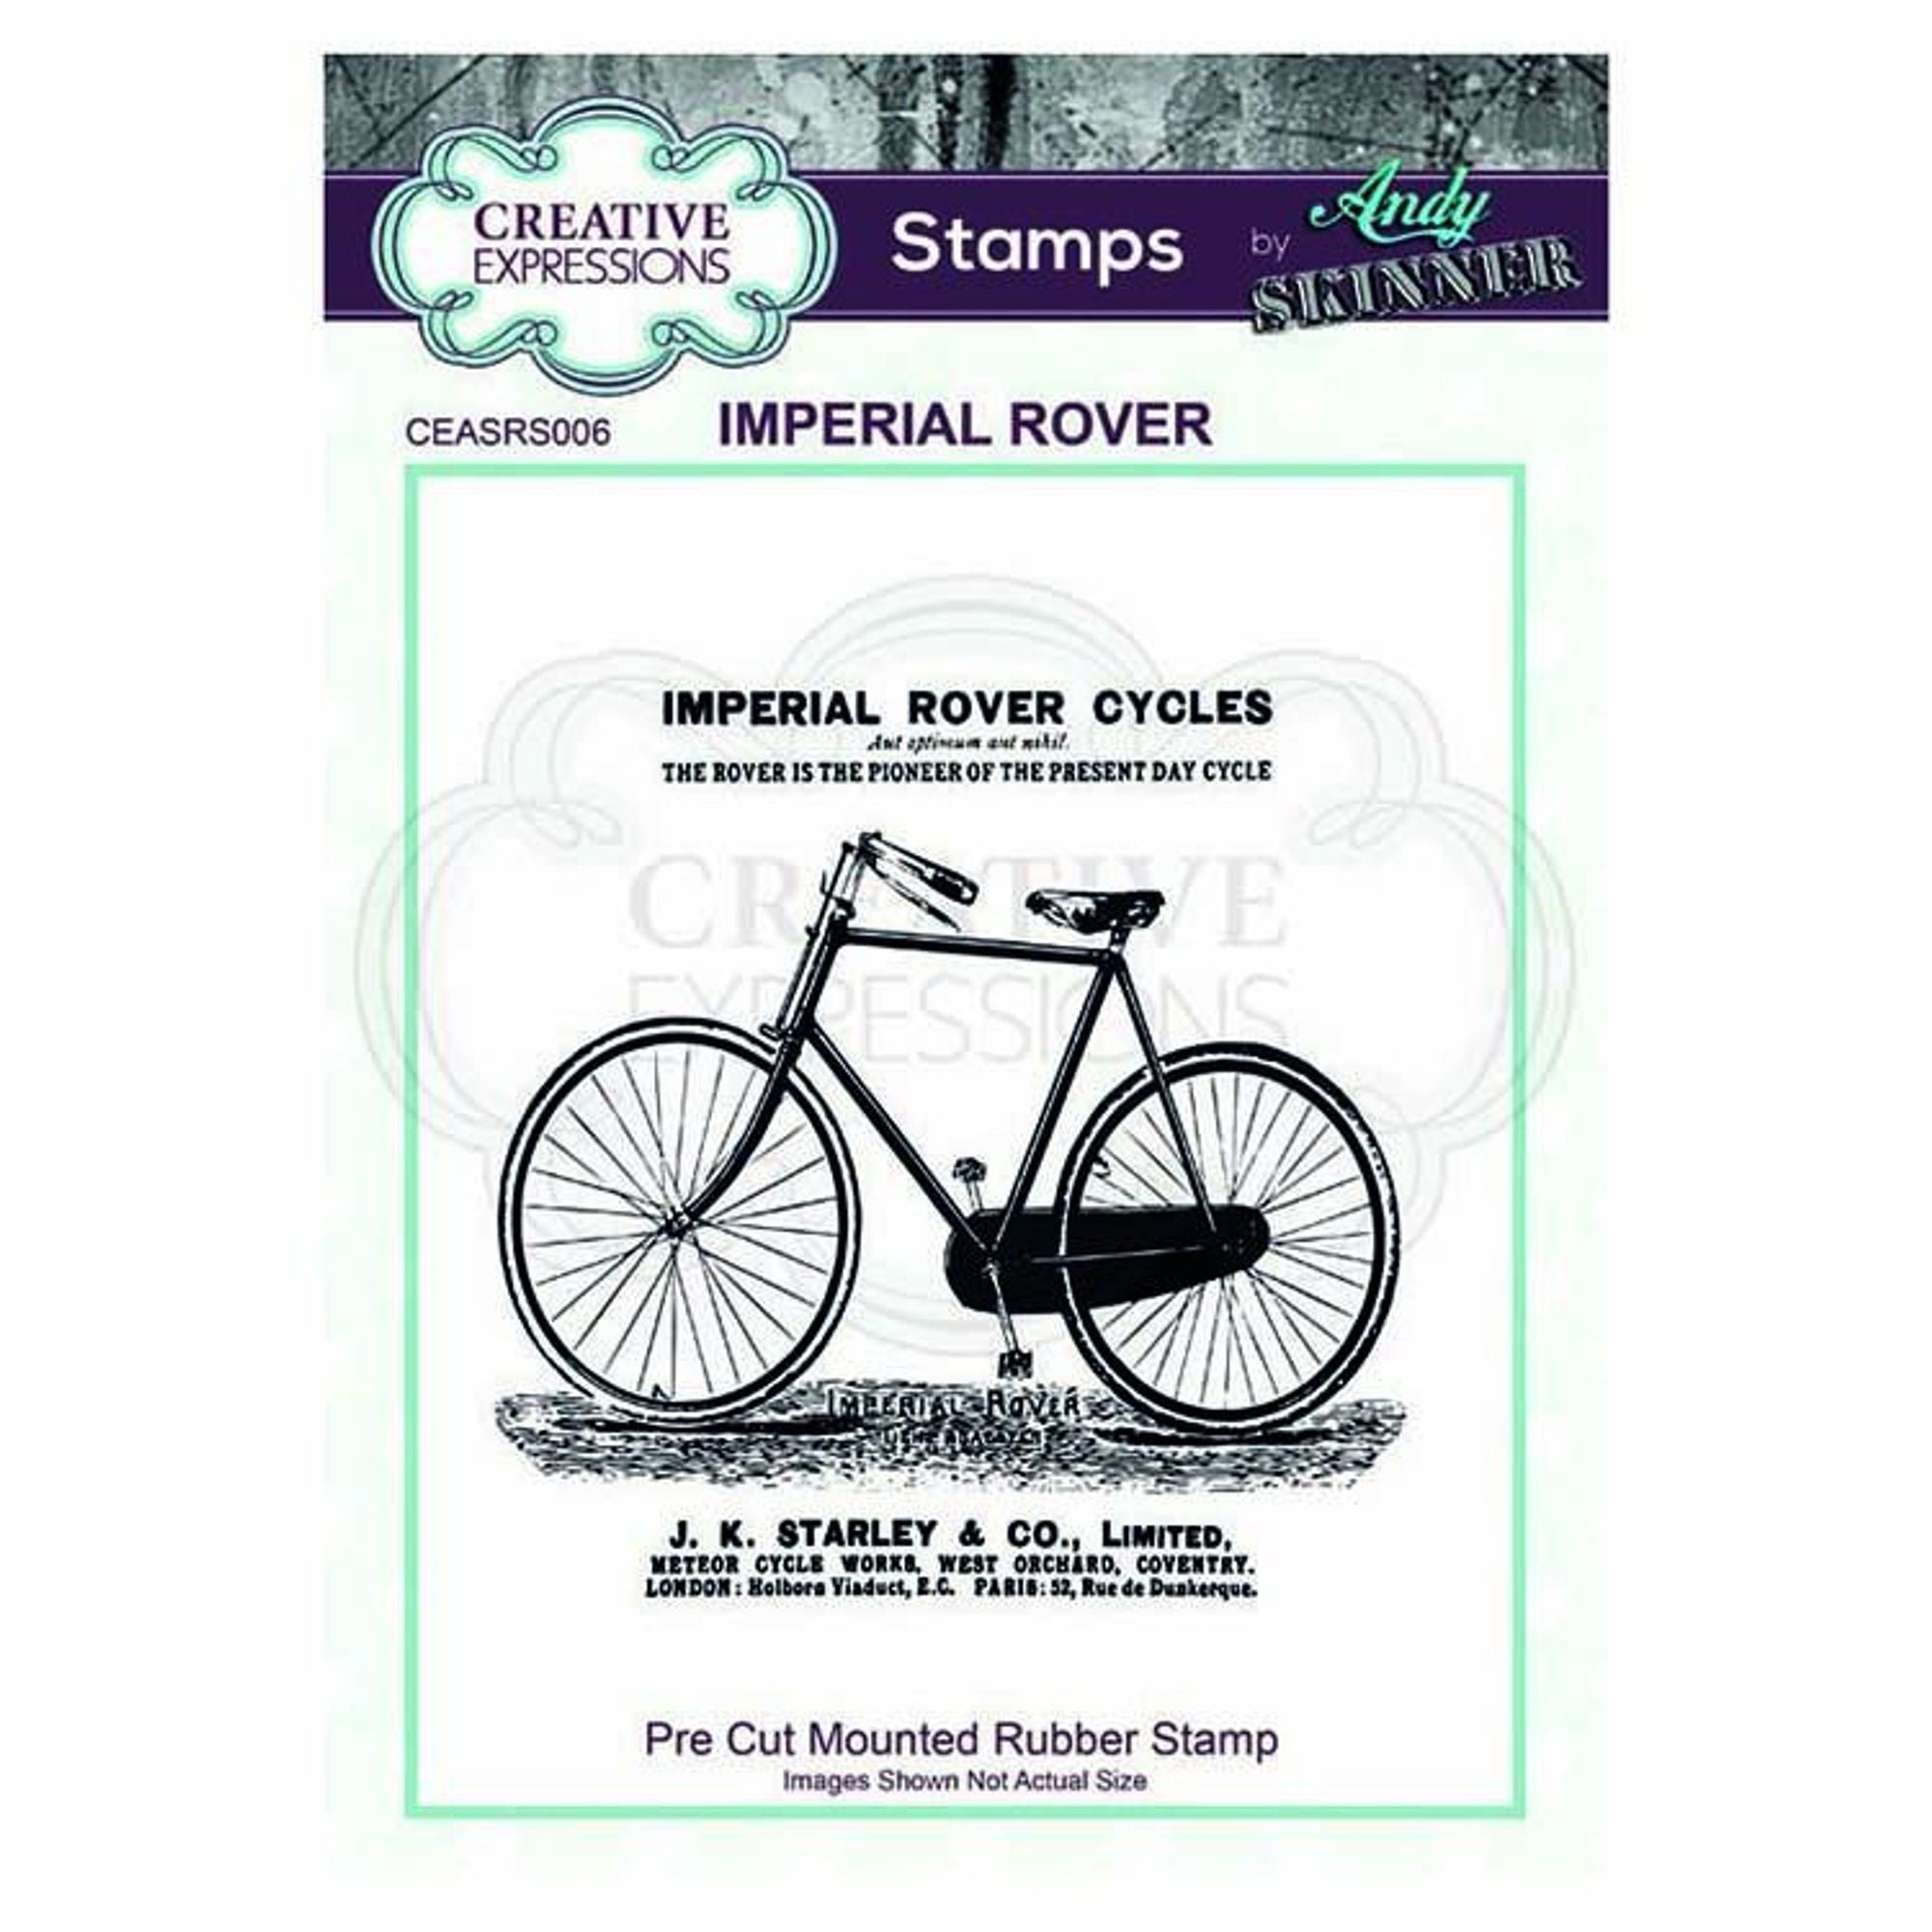 Creative Expressions Pre Cut Rubber Stamp by Andy Skinner Imperial Rover